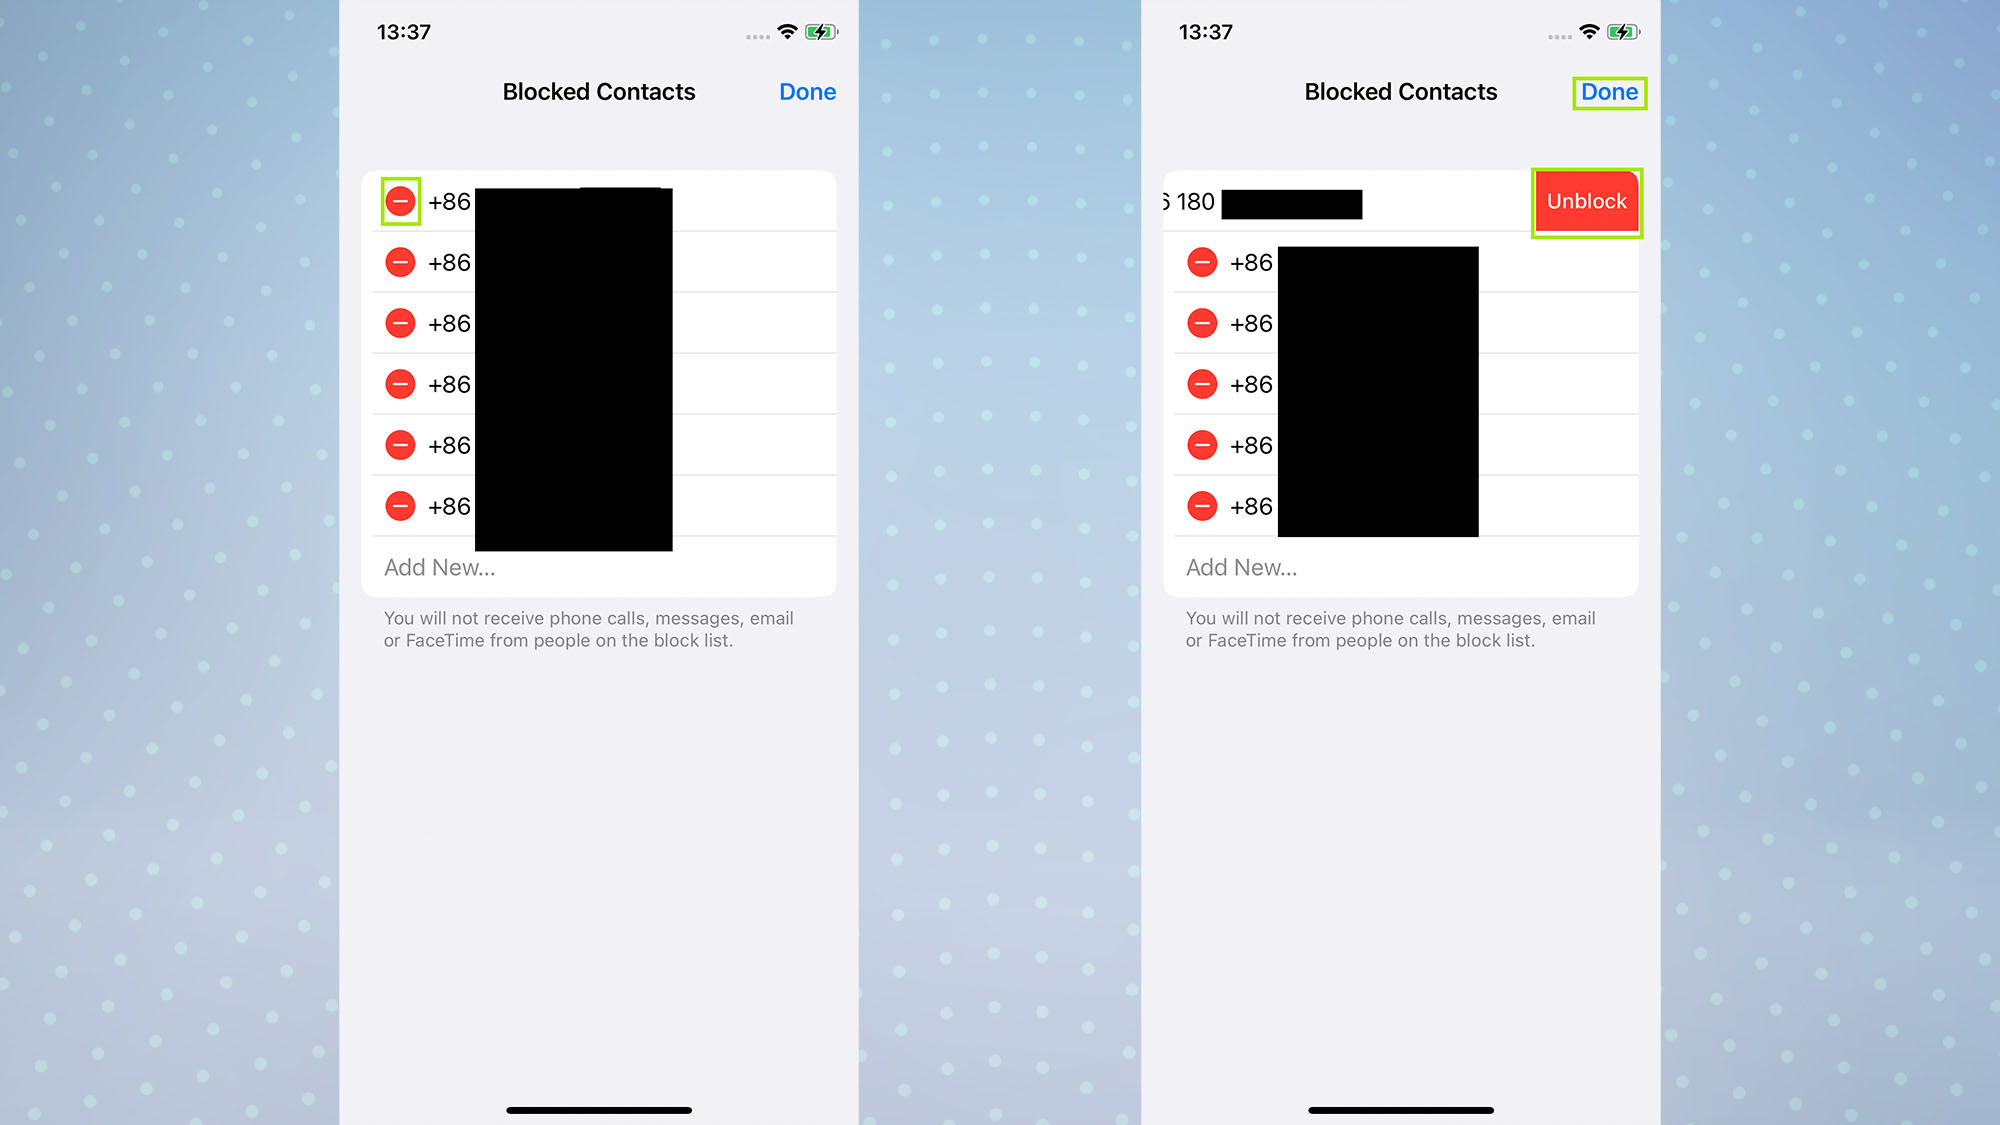 A screenshot of an iPhone screen showing a list of blocked contacts being edited